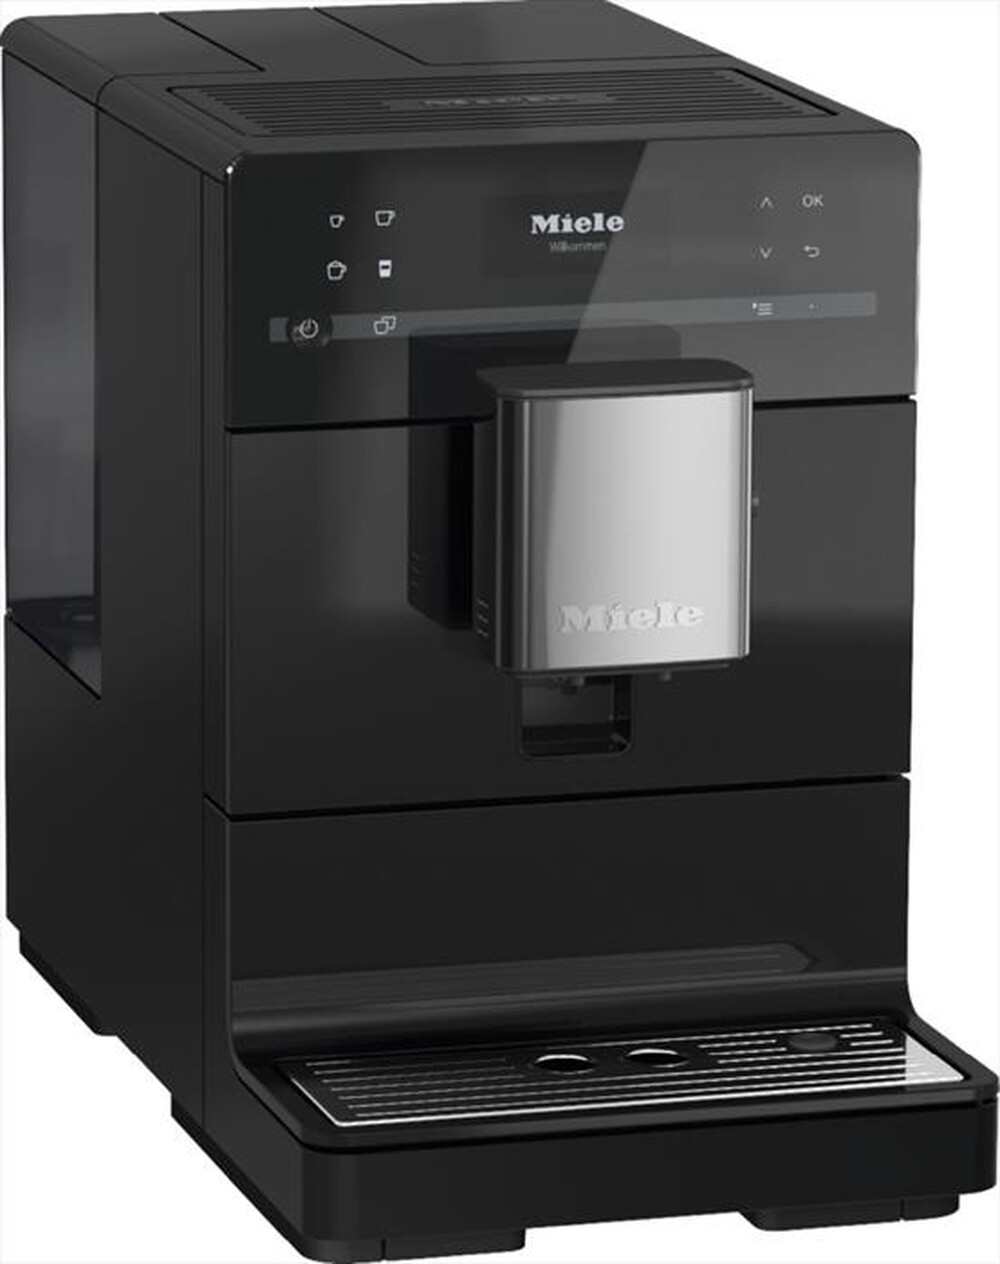 "MIELE - CM 5310 OBSW"